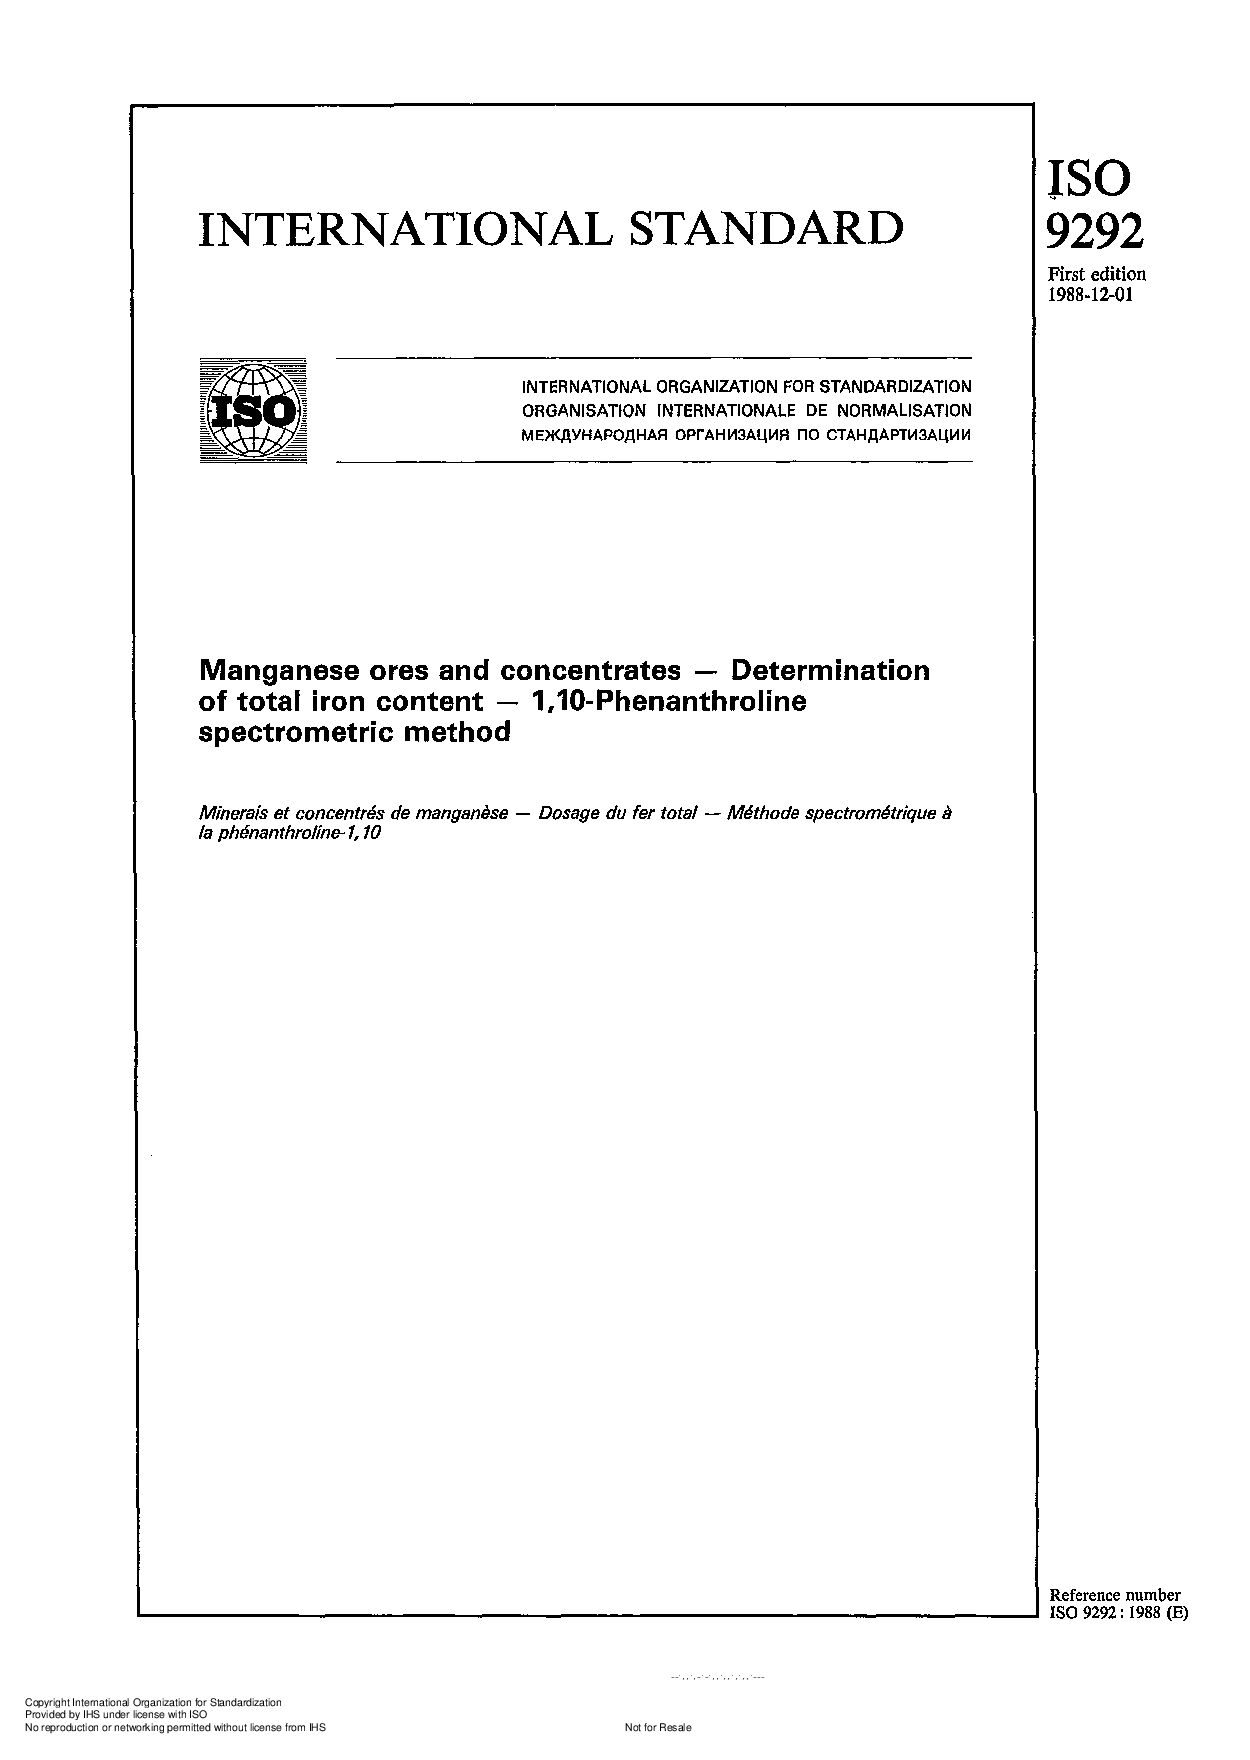 ISO 9292:1988